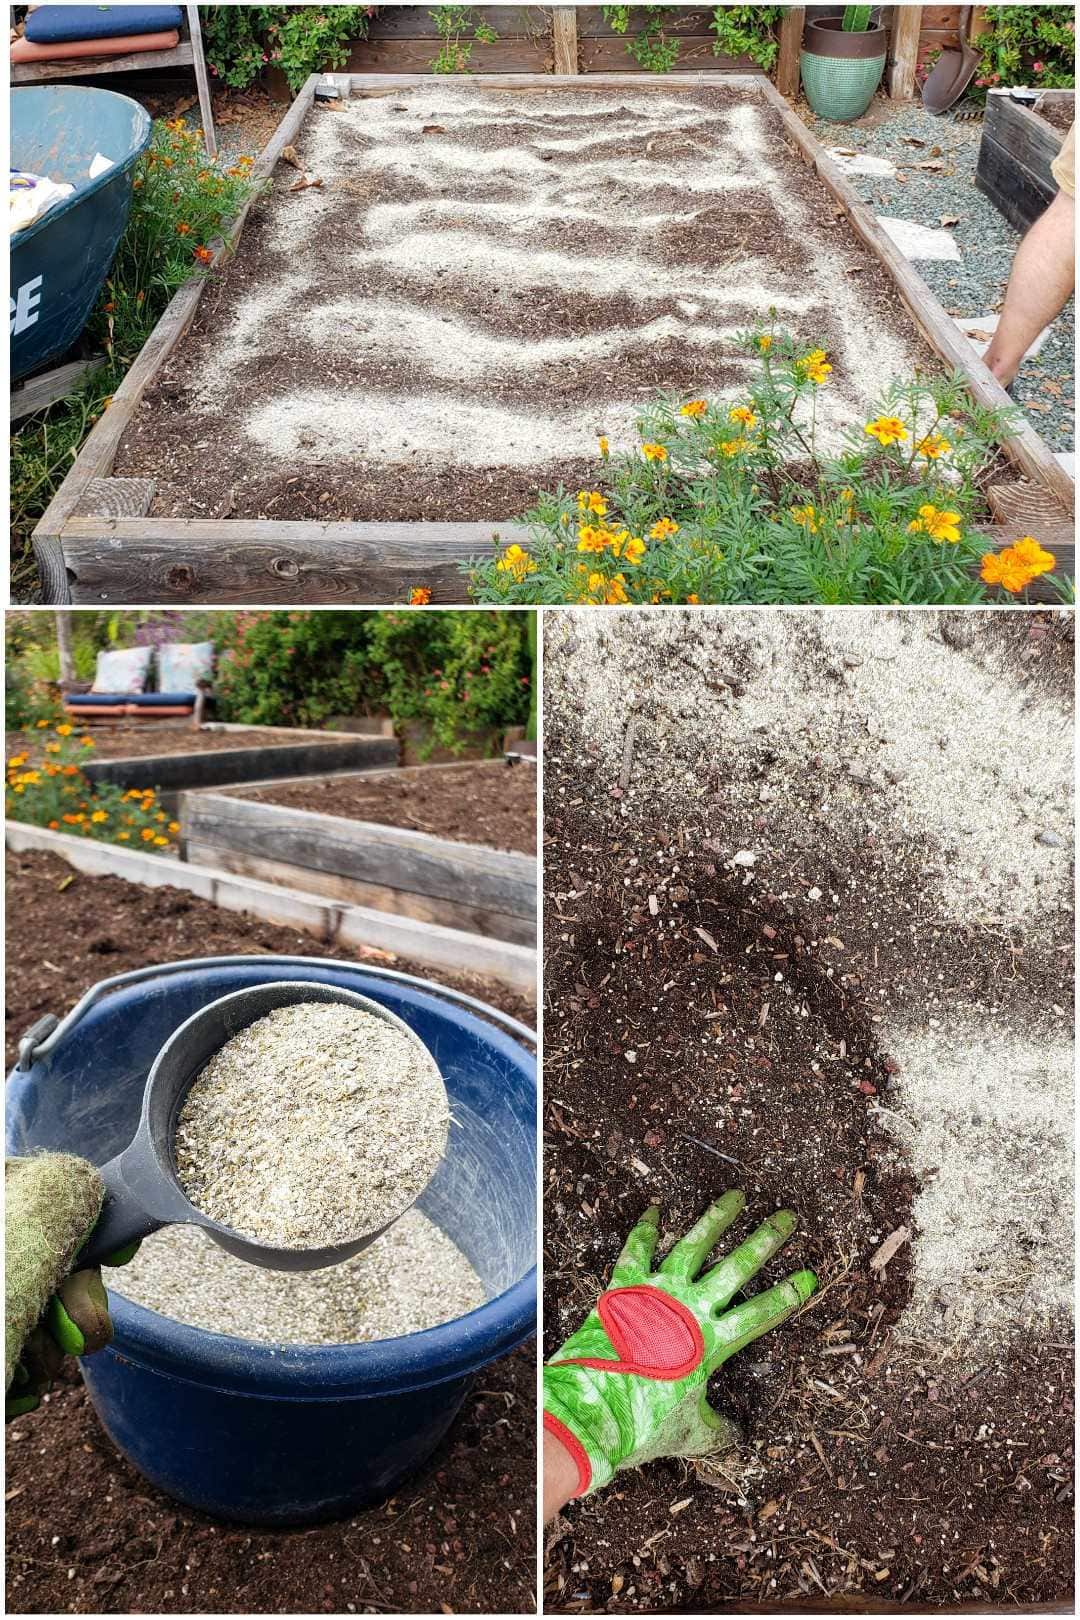 A three part image collage, the first image shows a garden bed that is empty of plants yet is full of soil. There  is a whitish dust spread throughout the top of the soil. There is a wheel barrow next to the garden bed, as well as various marigolds. The second image shows a blue bucket sitting on top of an empty garden bed, a hand is holding a measuring cup of sorts directly above the bucket where the measuring cup and bucket both contain various amendments used to feed the soil and the plants that will soon be planted in it. The third image shows the top of a garden bed, the soil has been sprinkled with the amendments, and a gloved hand is starting to scratch the amendments into the soil, mixing it into the top inch or so. 